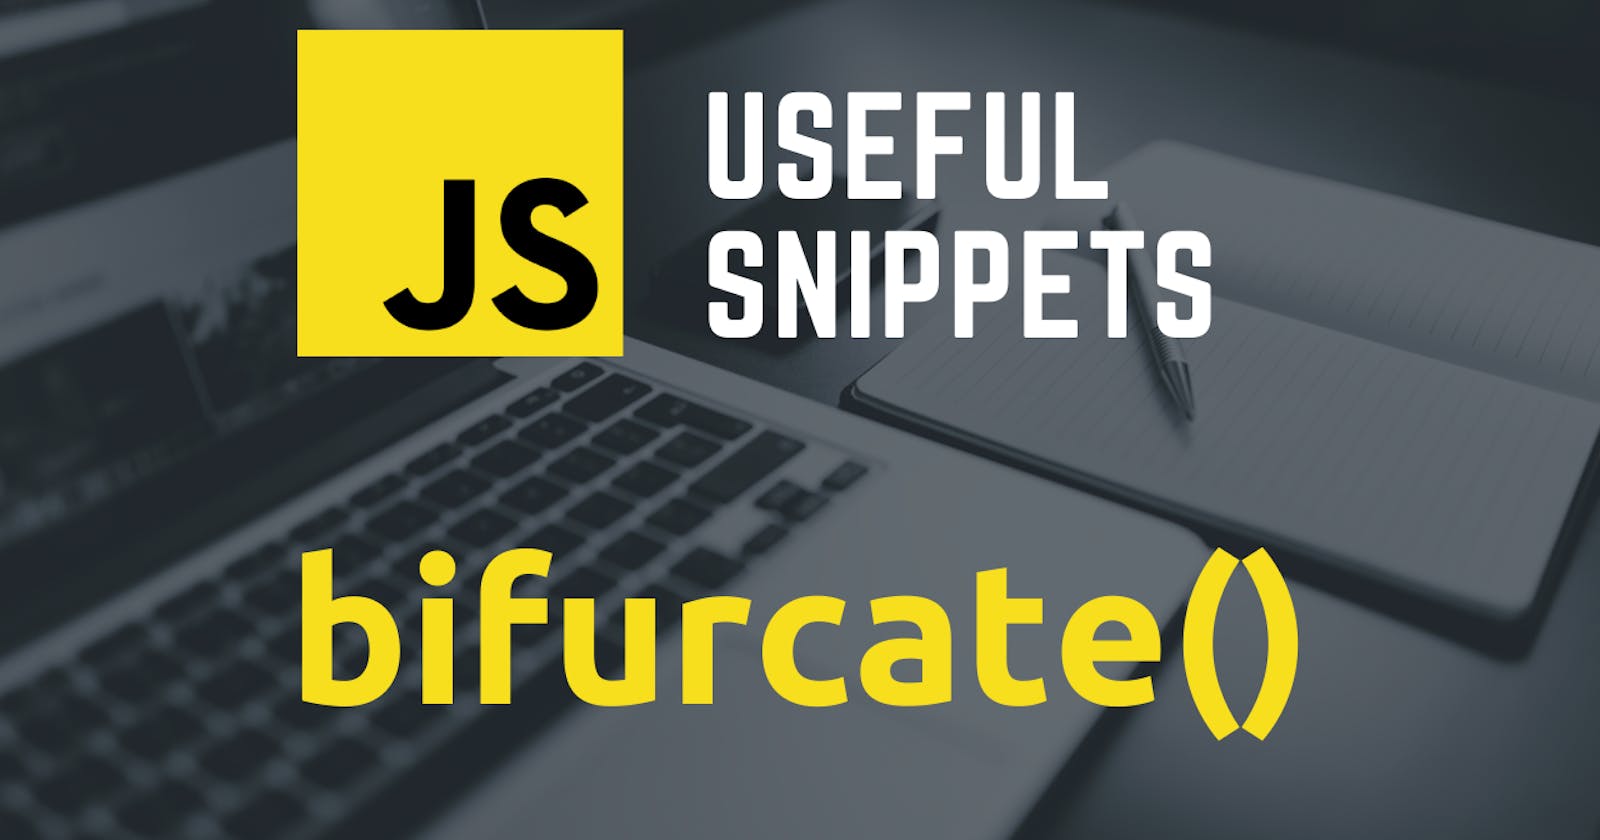 Bifurcate array by given rules in javascript